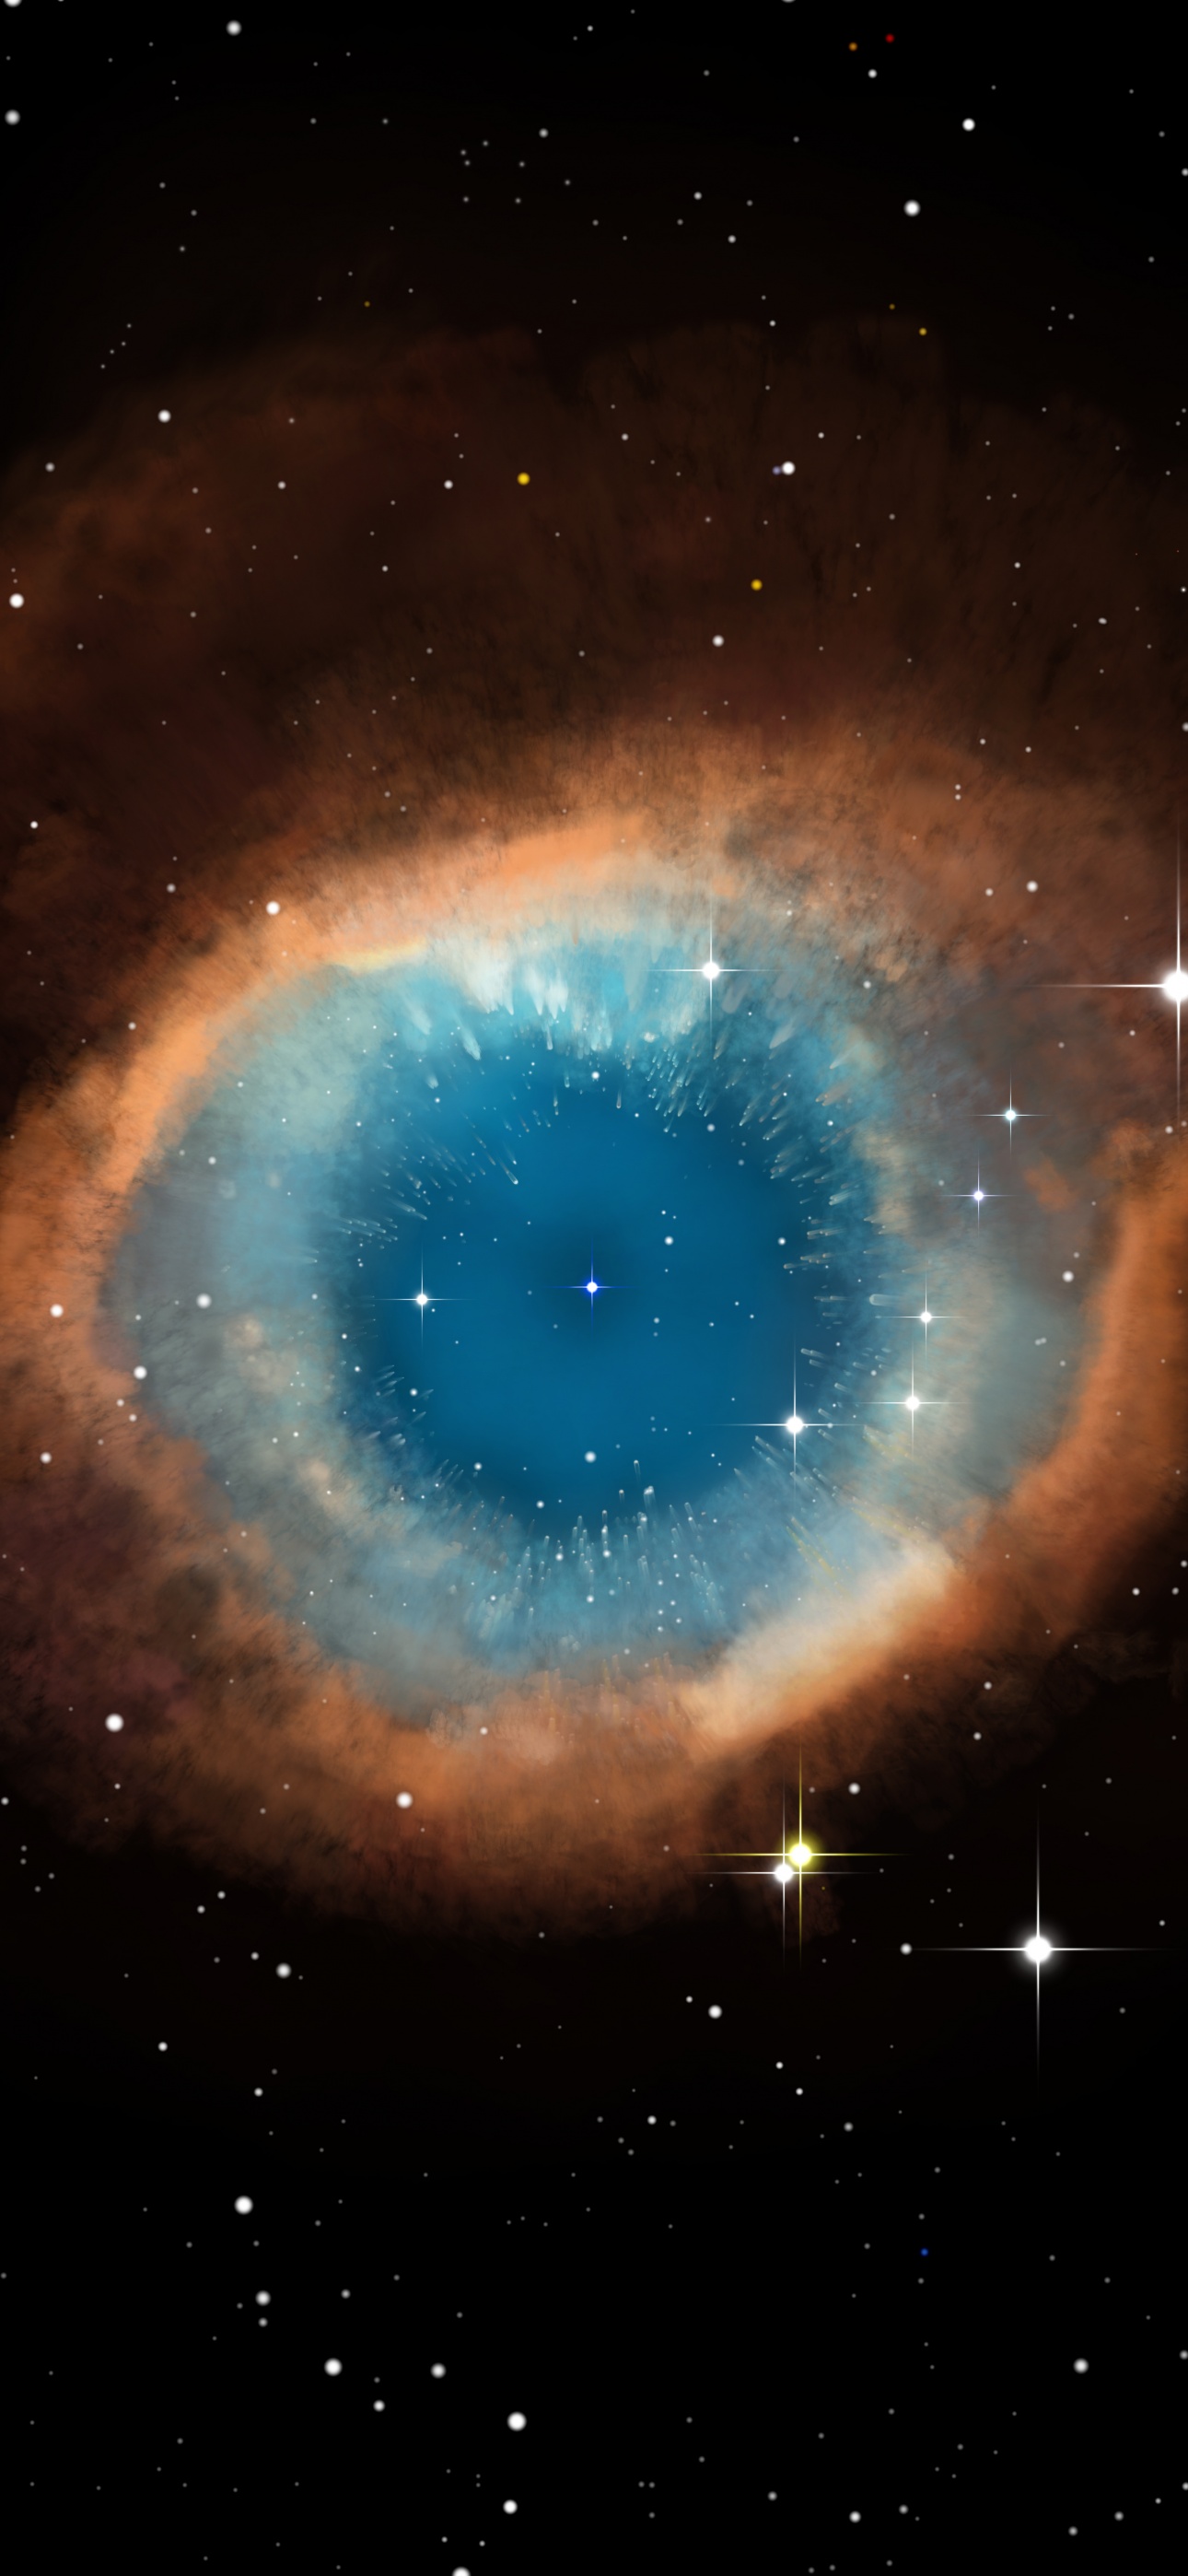 Helix Nebula wallpapers for desktop download free Helix Nebula pictures  and backgrounds for PC  moborg